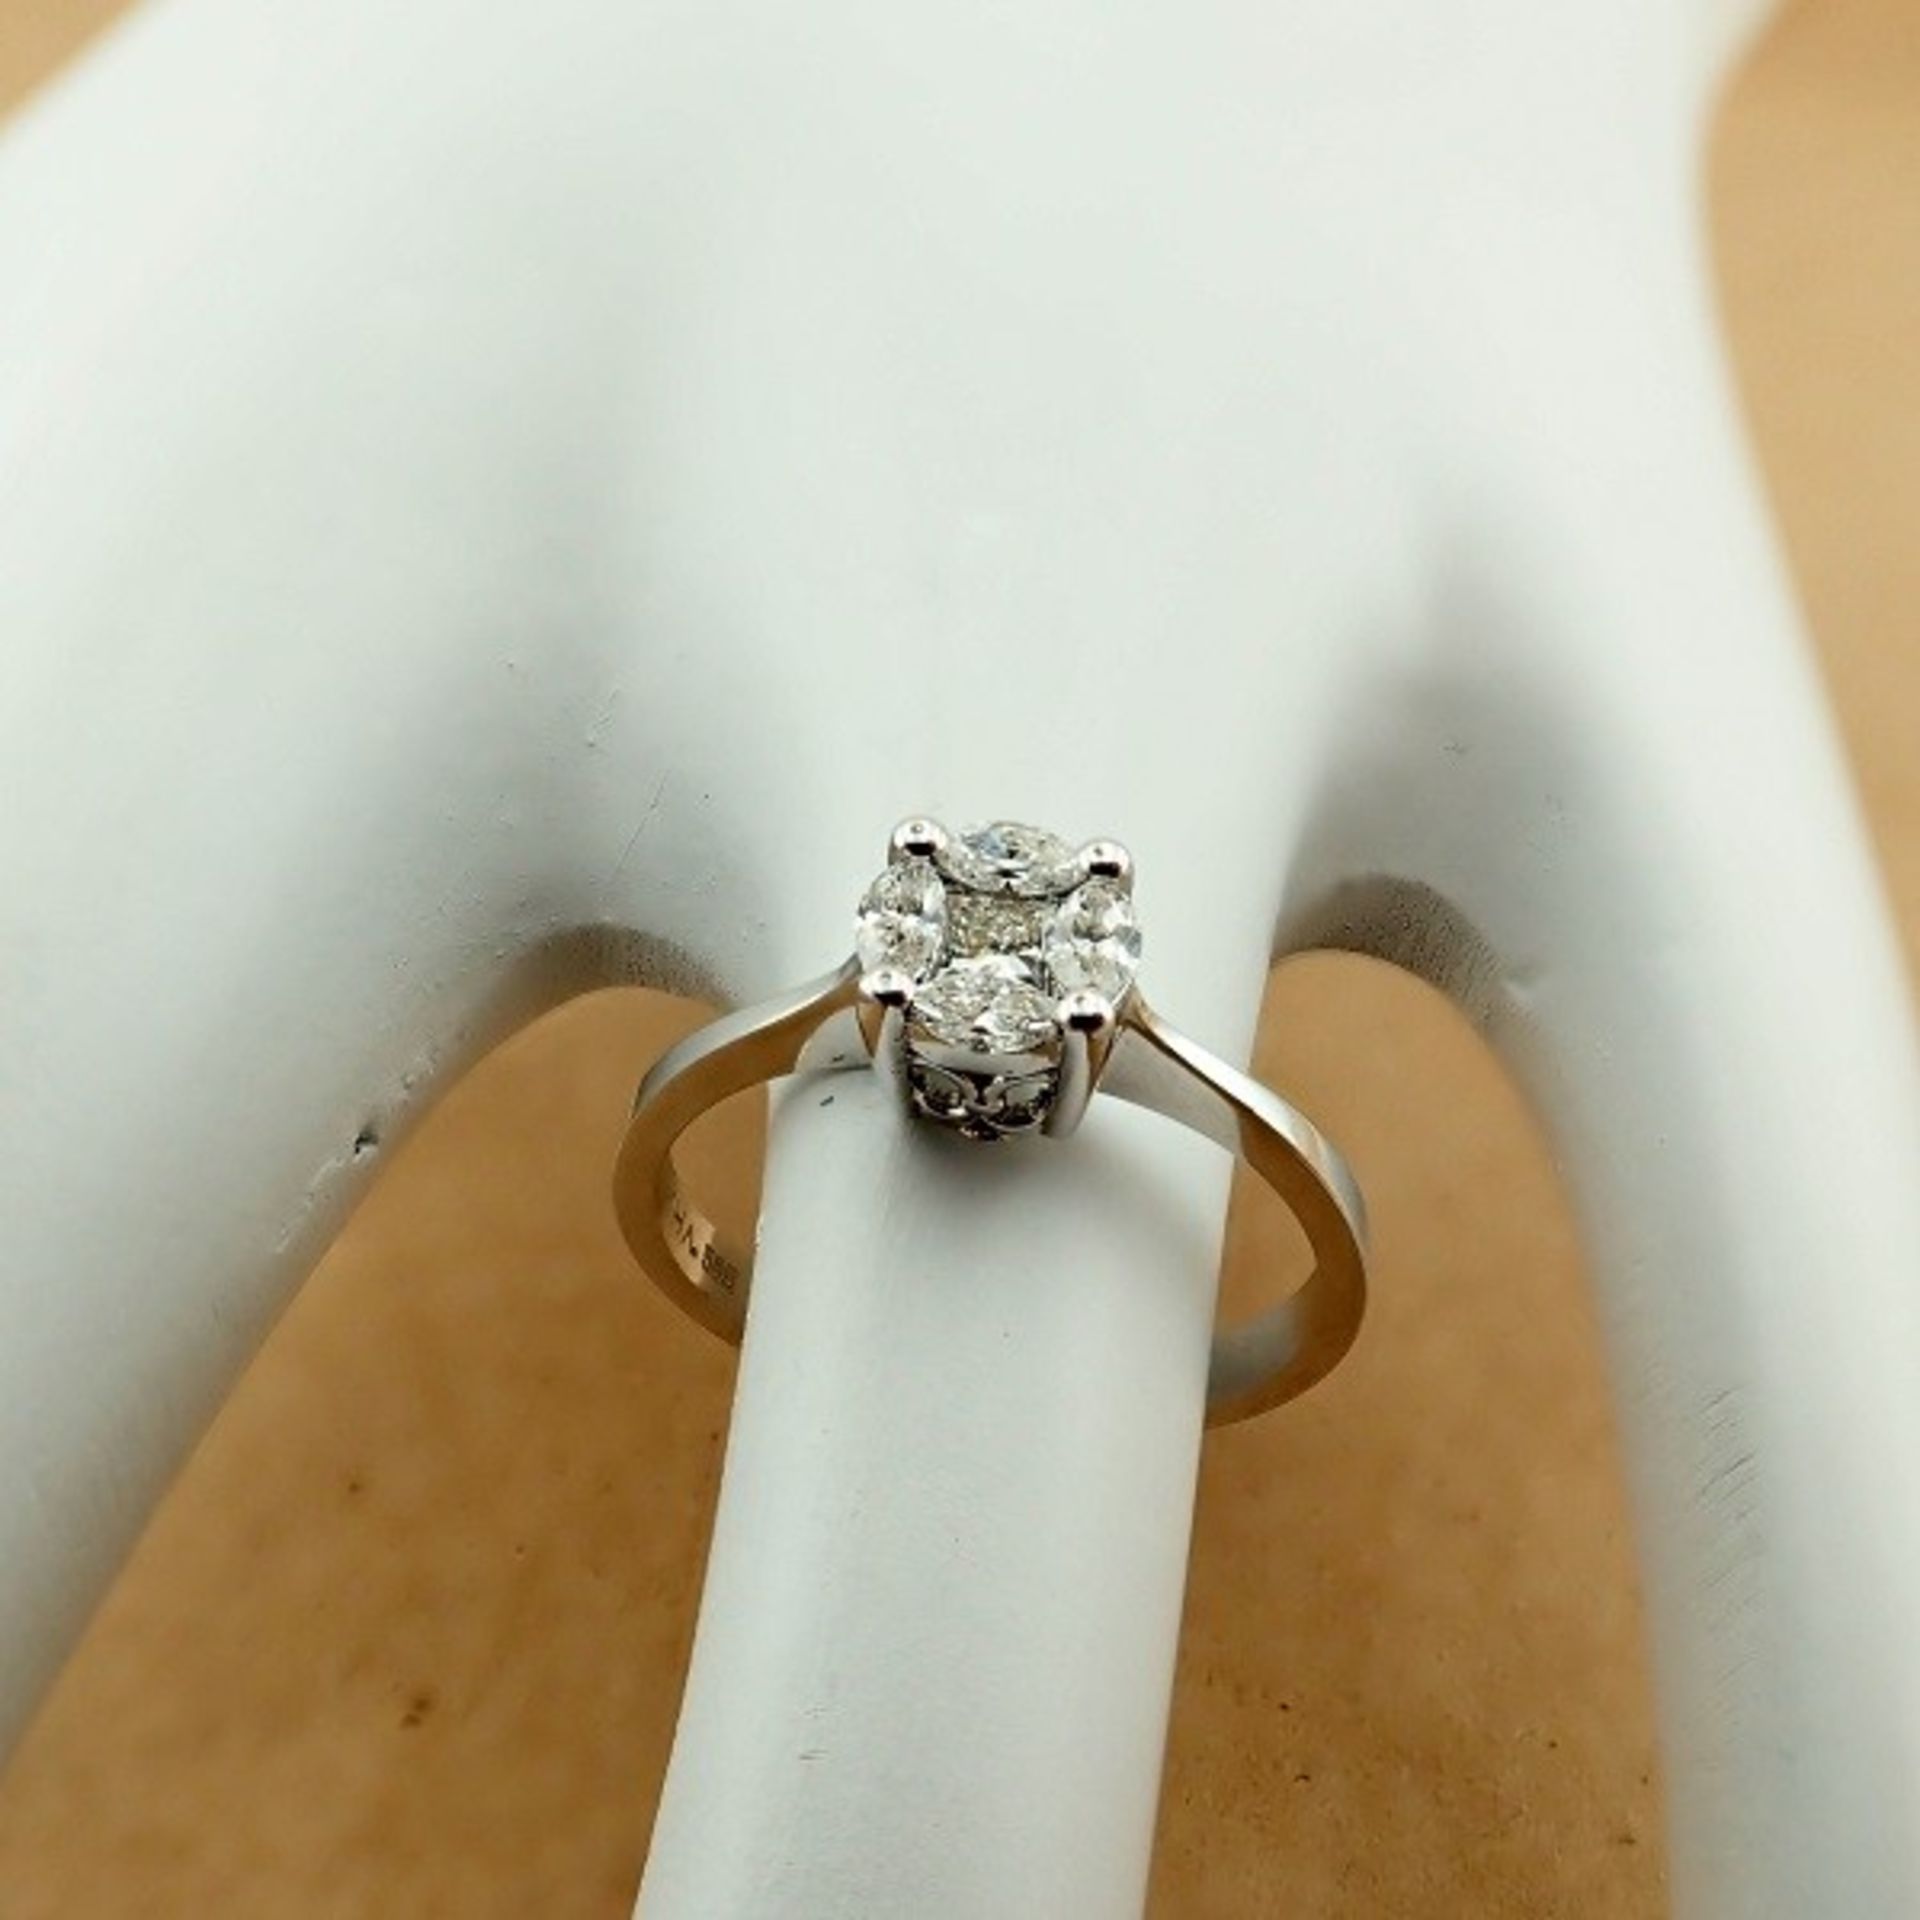 Certificated 14K White Gold Diamond Ring - Image 5 of 7